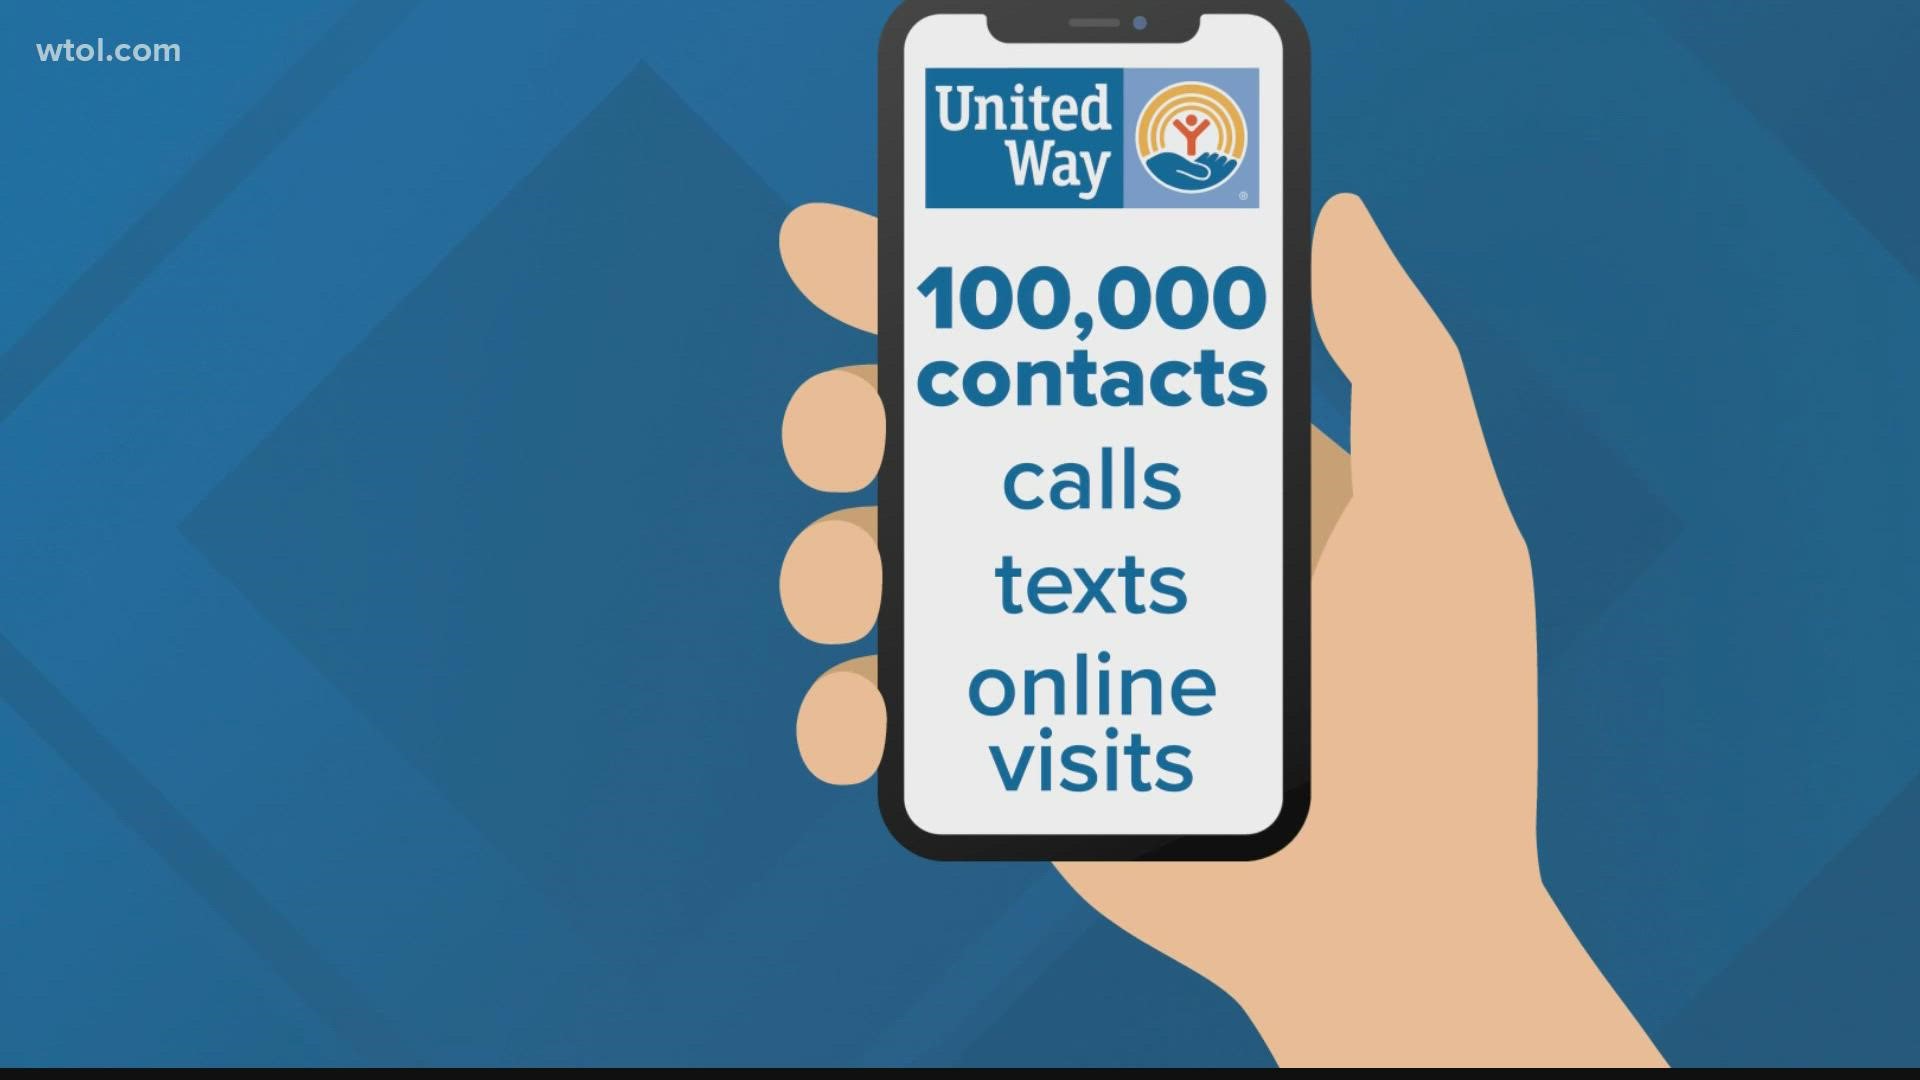 As the pandemic continues to change the needs in the community, the United Way of Greater Toledo is shifting to meet those needs.